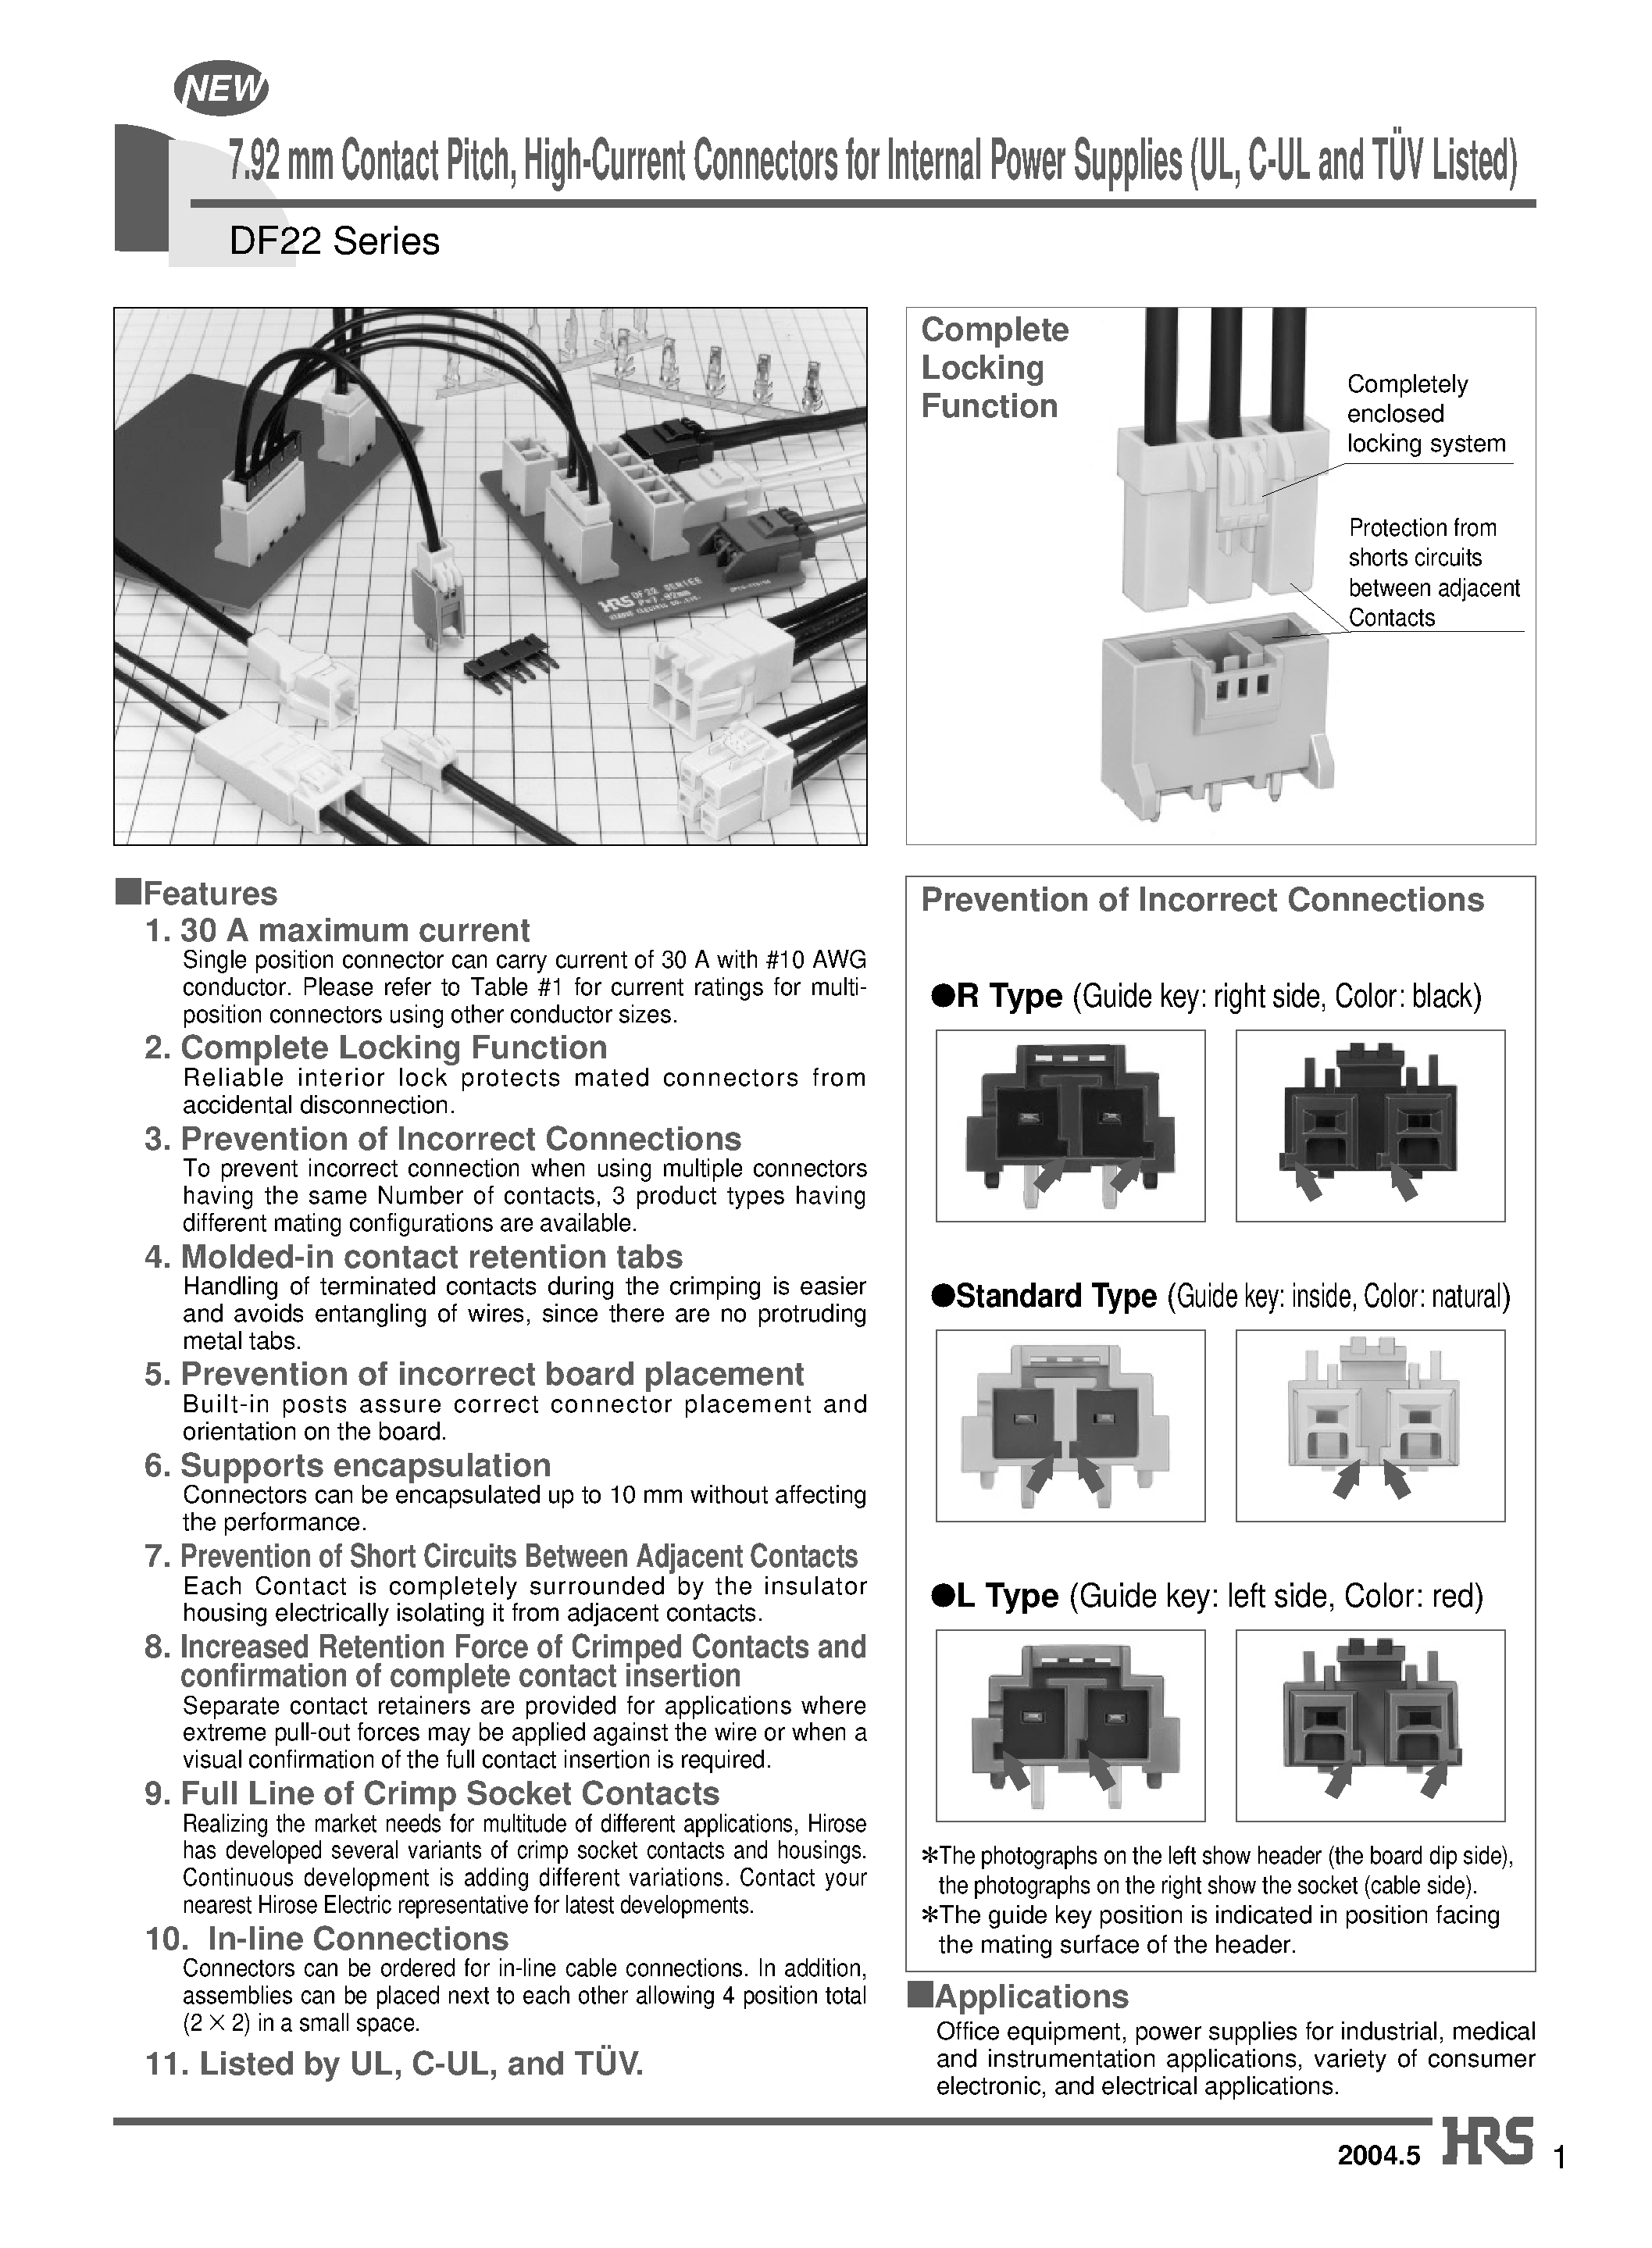 Datasheet DF22-1S-7.92DSA - 7.92 mm Contact Pitch/ High-Current Connectors for Internal Power Supplies (UL/ C-UL and TUV Listed) page 1